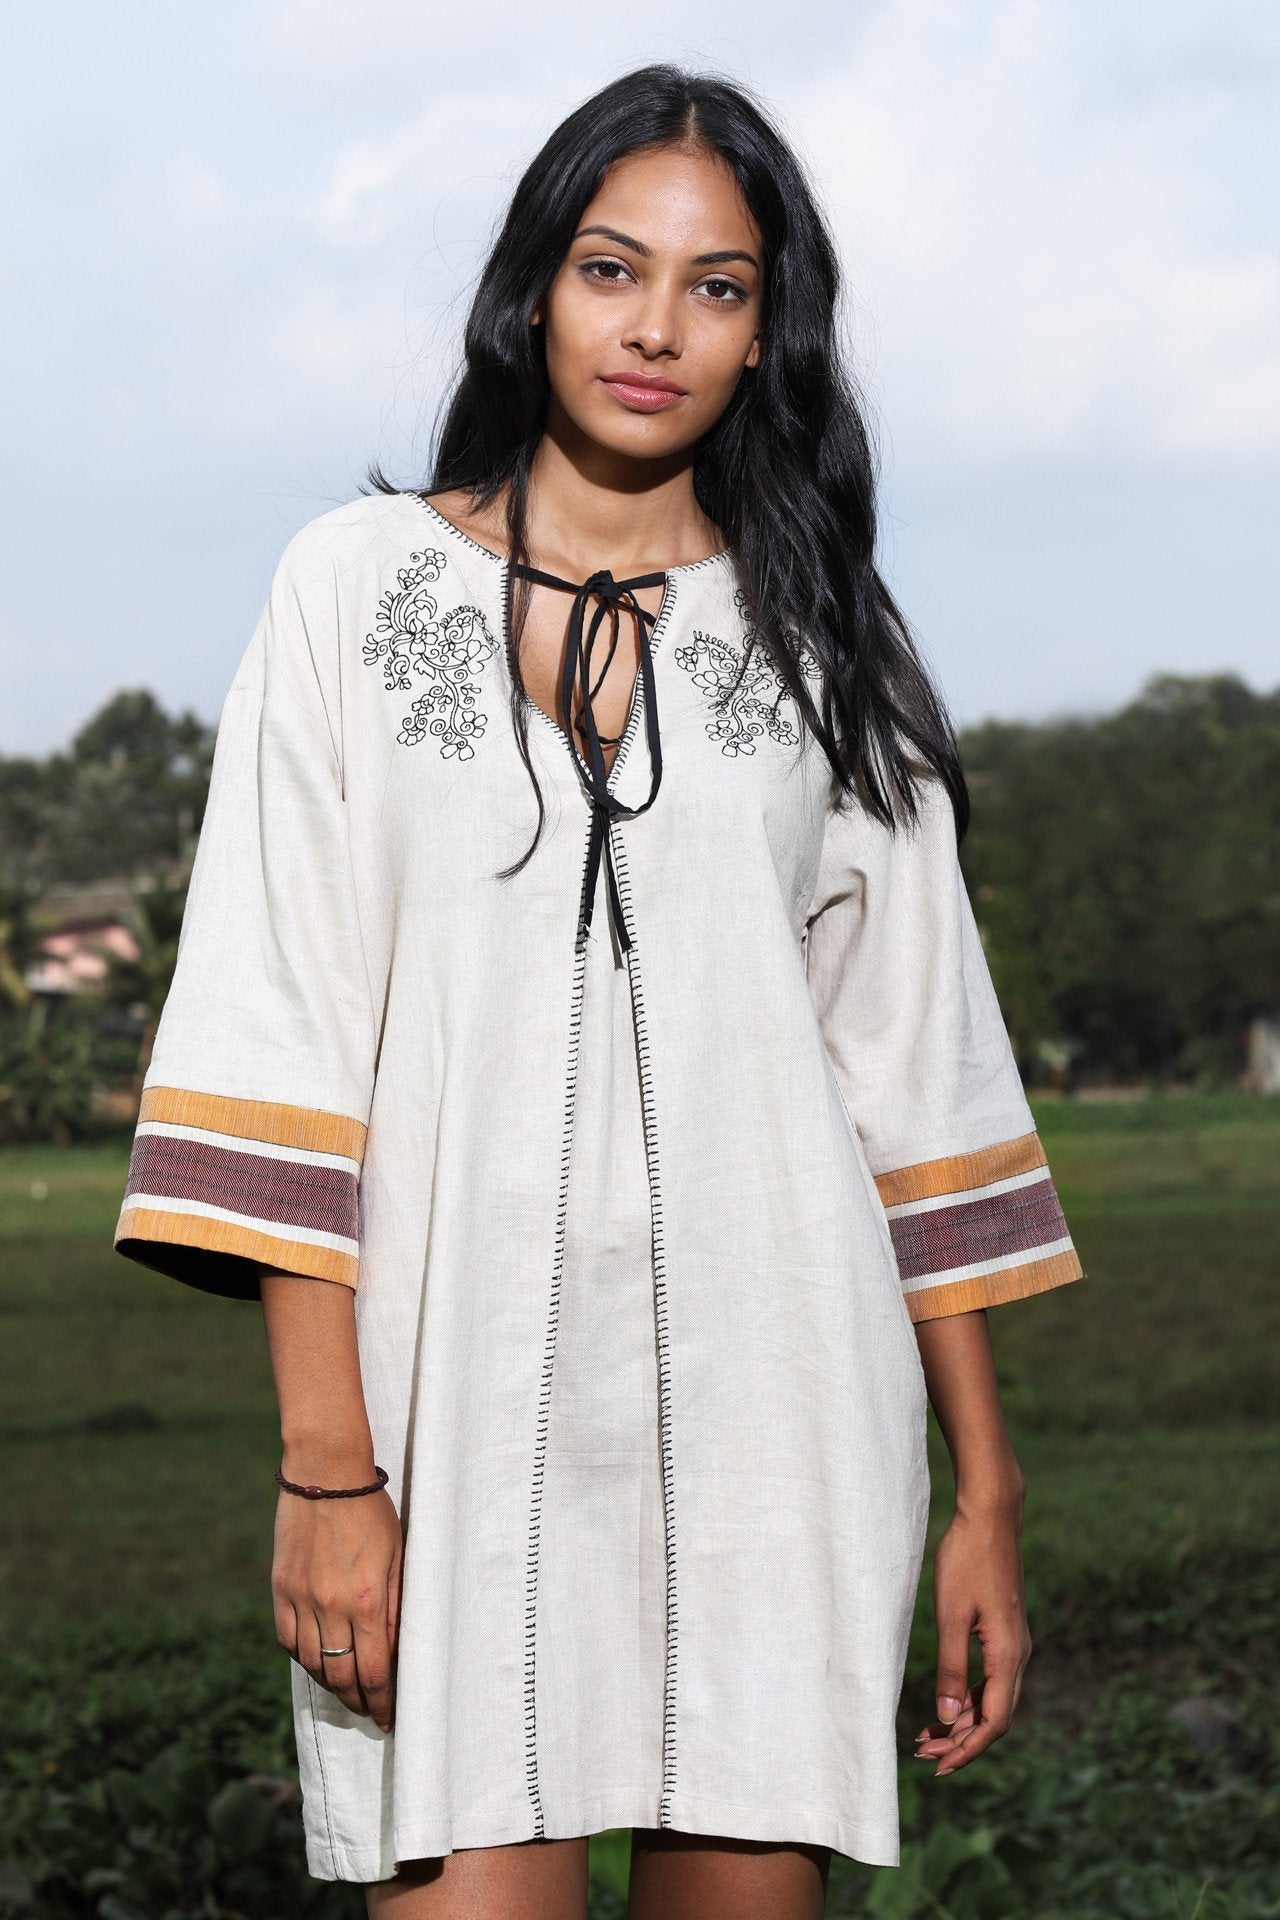 Linen Kurta Mini Dress - Indian Clothing in Denver, CO, Aurora, CO, Boulder, CO, Fort Collins, CO, Colorado Springs, CO, Parker, CO, Highlands Ranch, CO, Cherry Creek, CO, Centennial, CO, and Longmont, CO. Nationwide shipping USA - India Fashion X